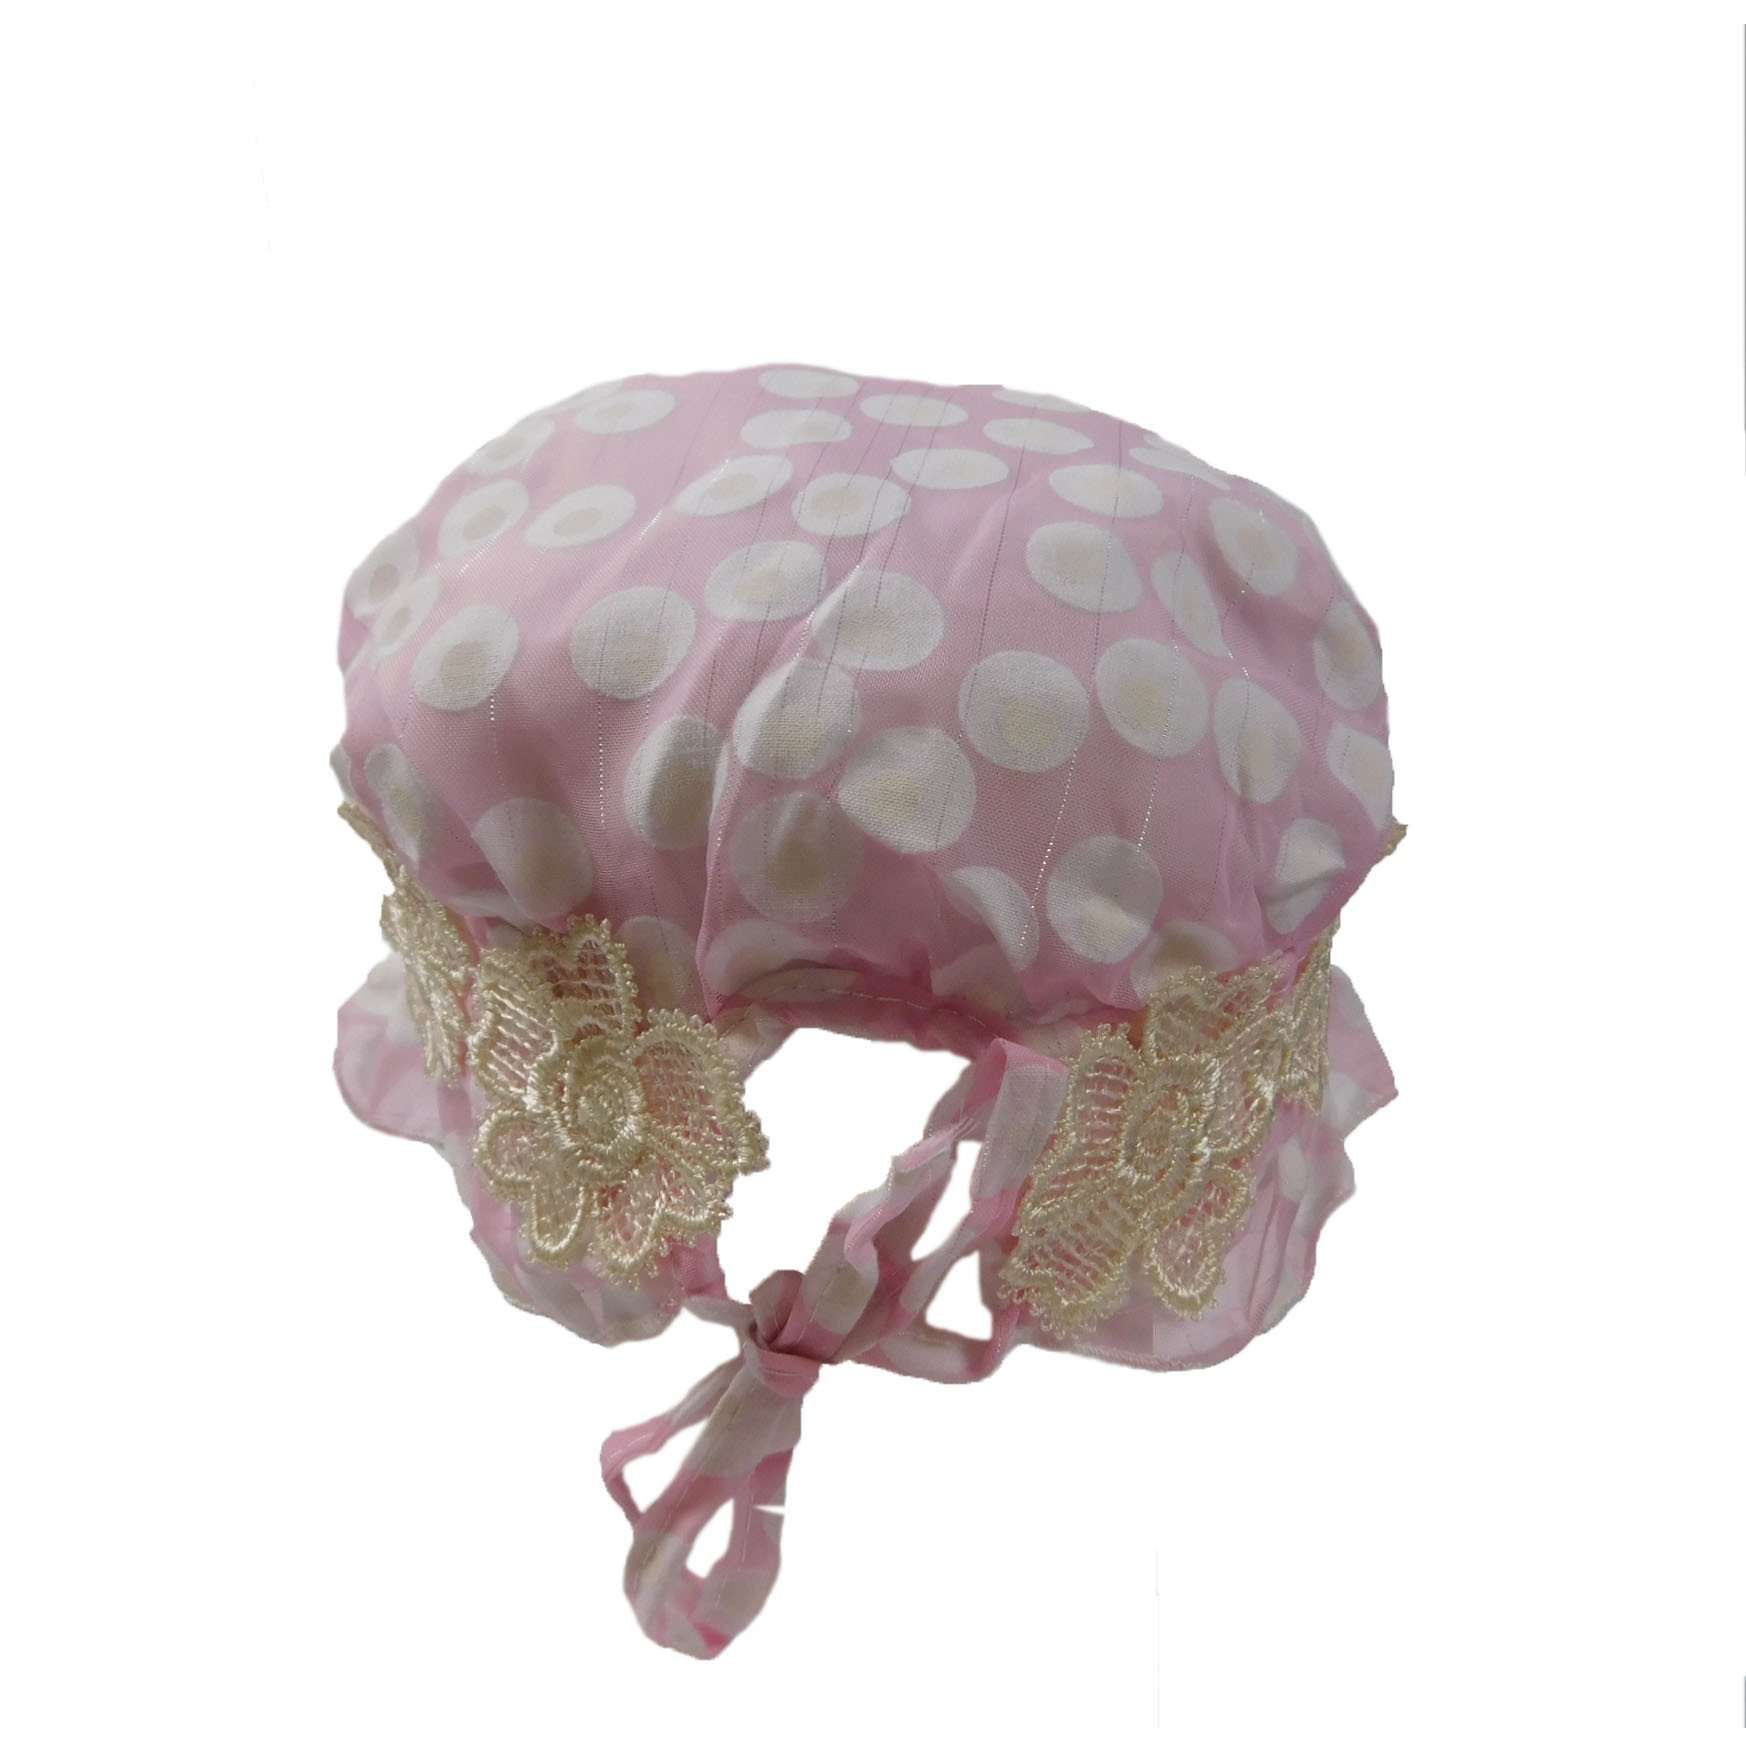 Polka Dot Bonnet with Lace and Silk Decoration Bucket Hat HHkids    